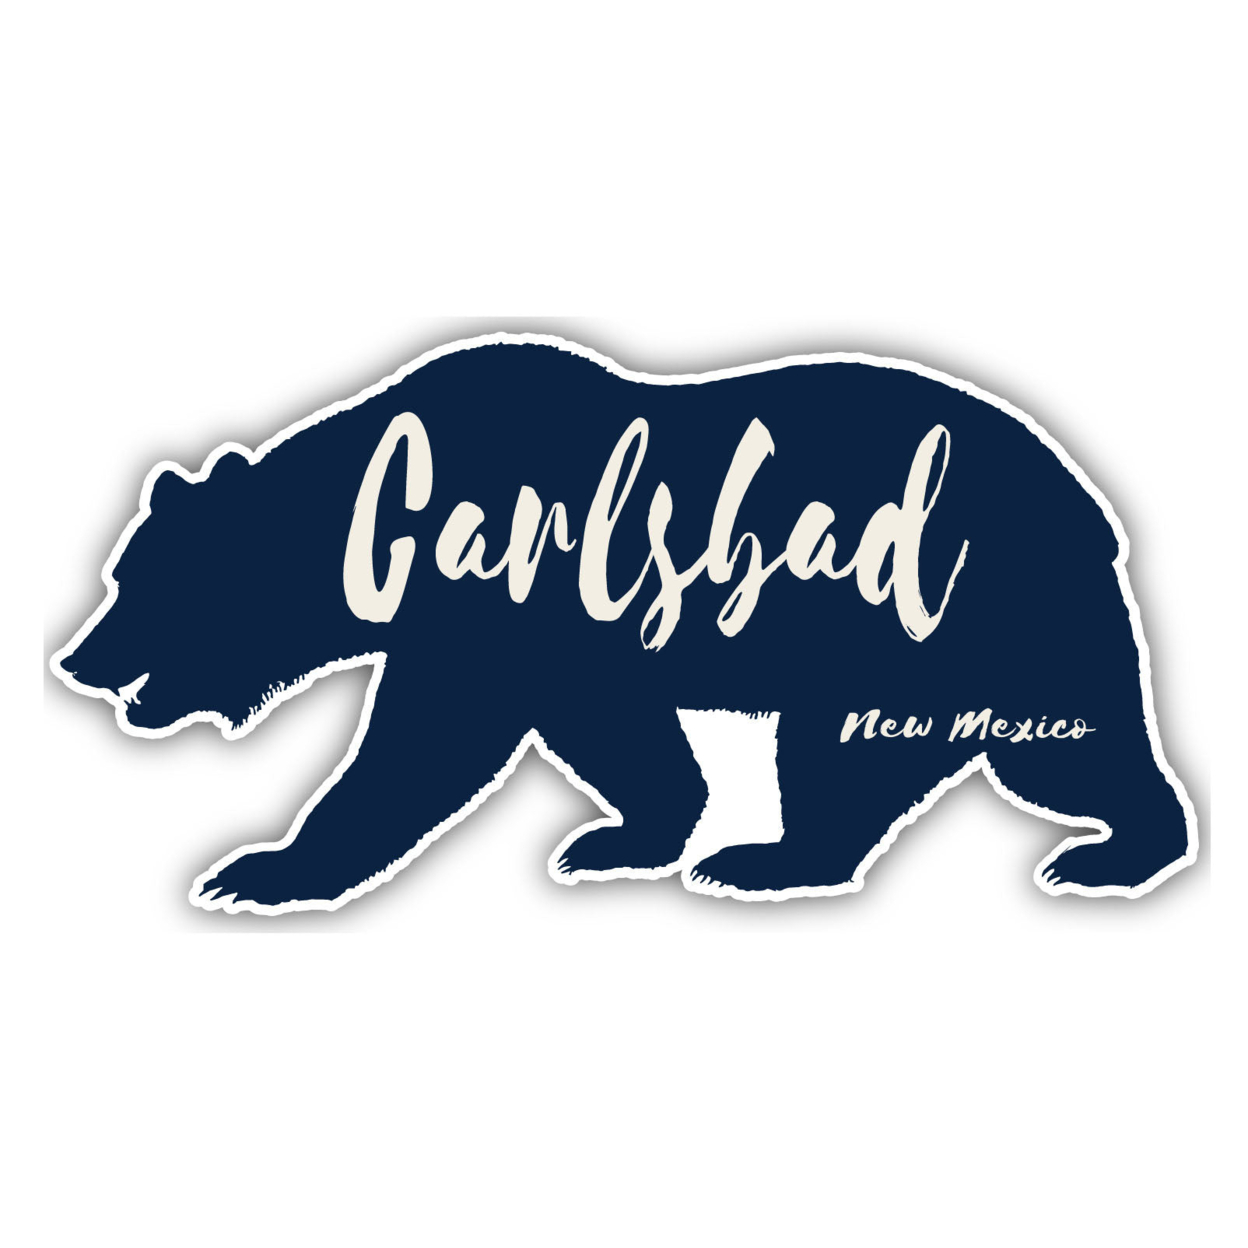 Carlsbad New Mexico Souvenir Decorative Stickers (Choose Theme And Size) - Single Unit, 10-Inch, Bear